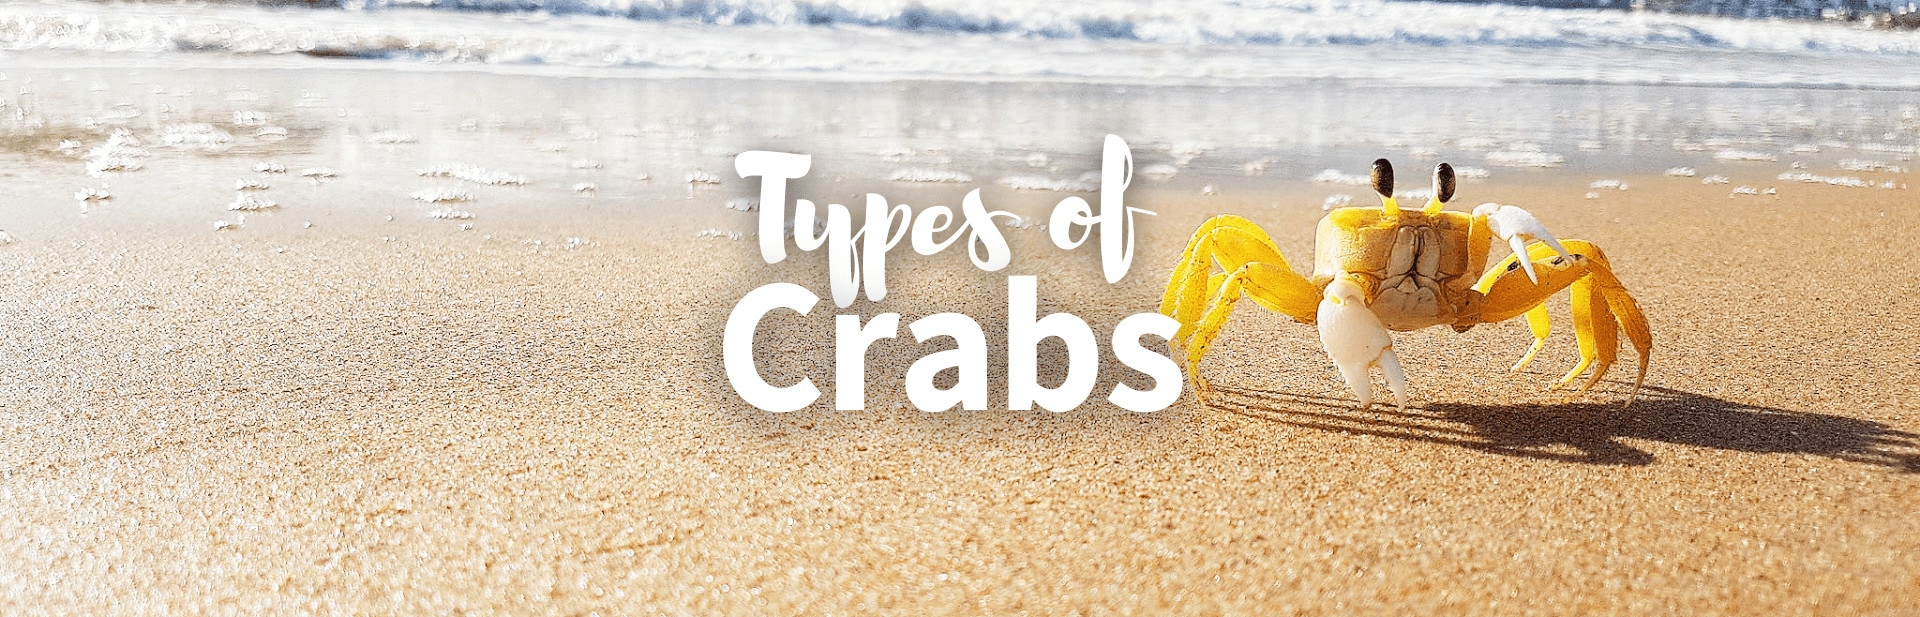 20 Different Types of Crabs: Facts, Pictures & Chart